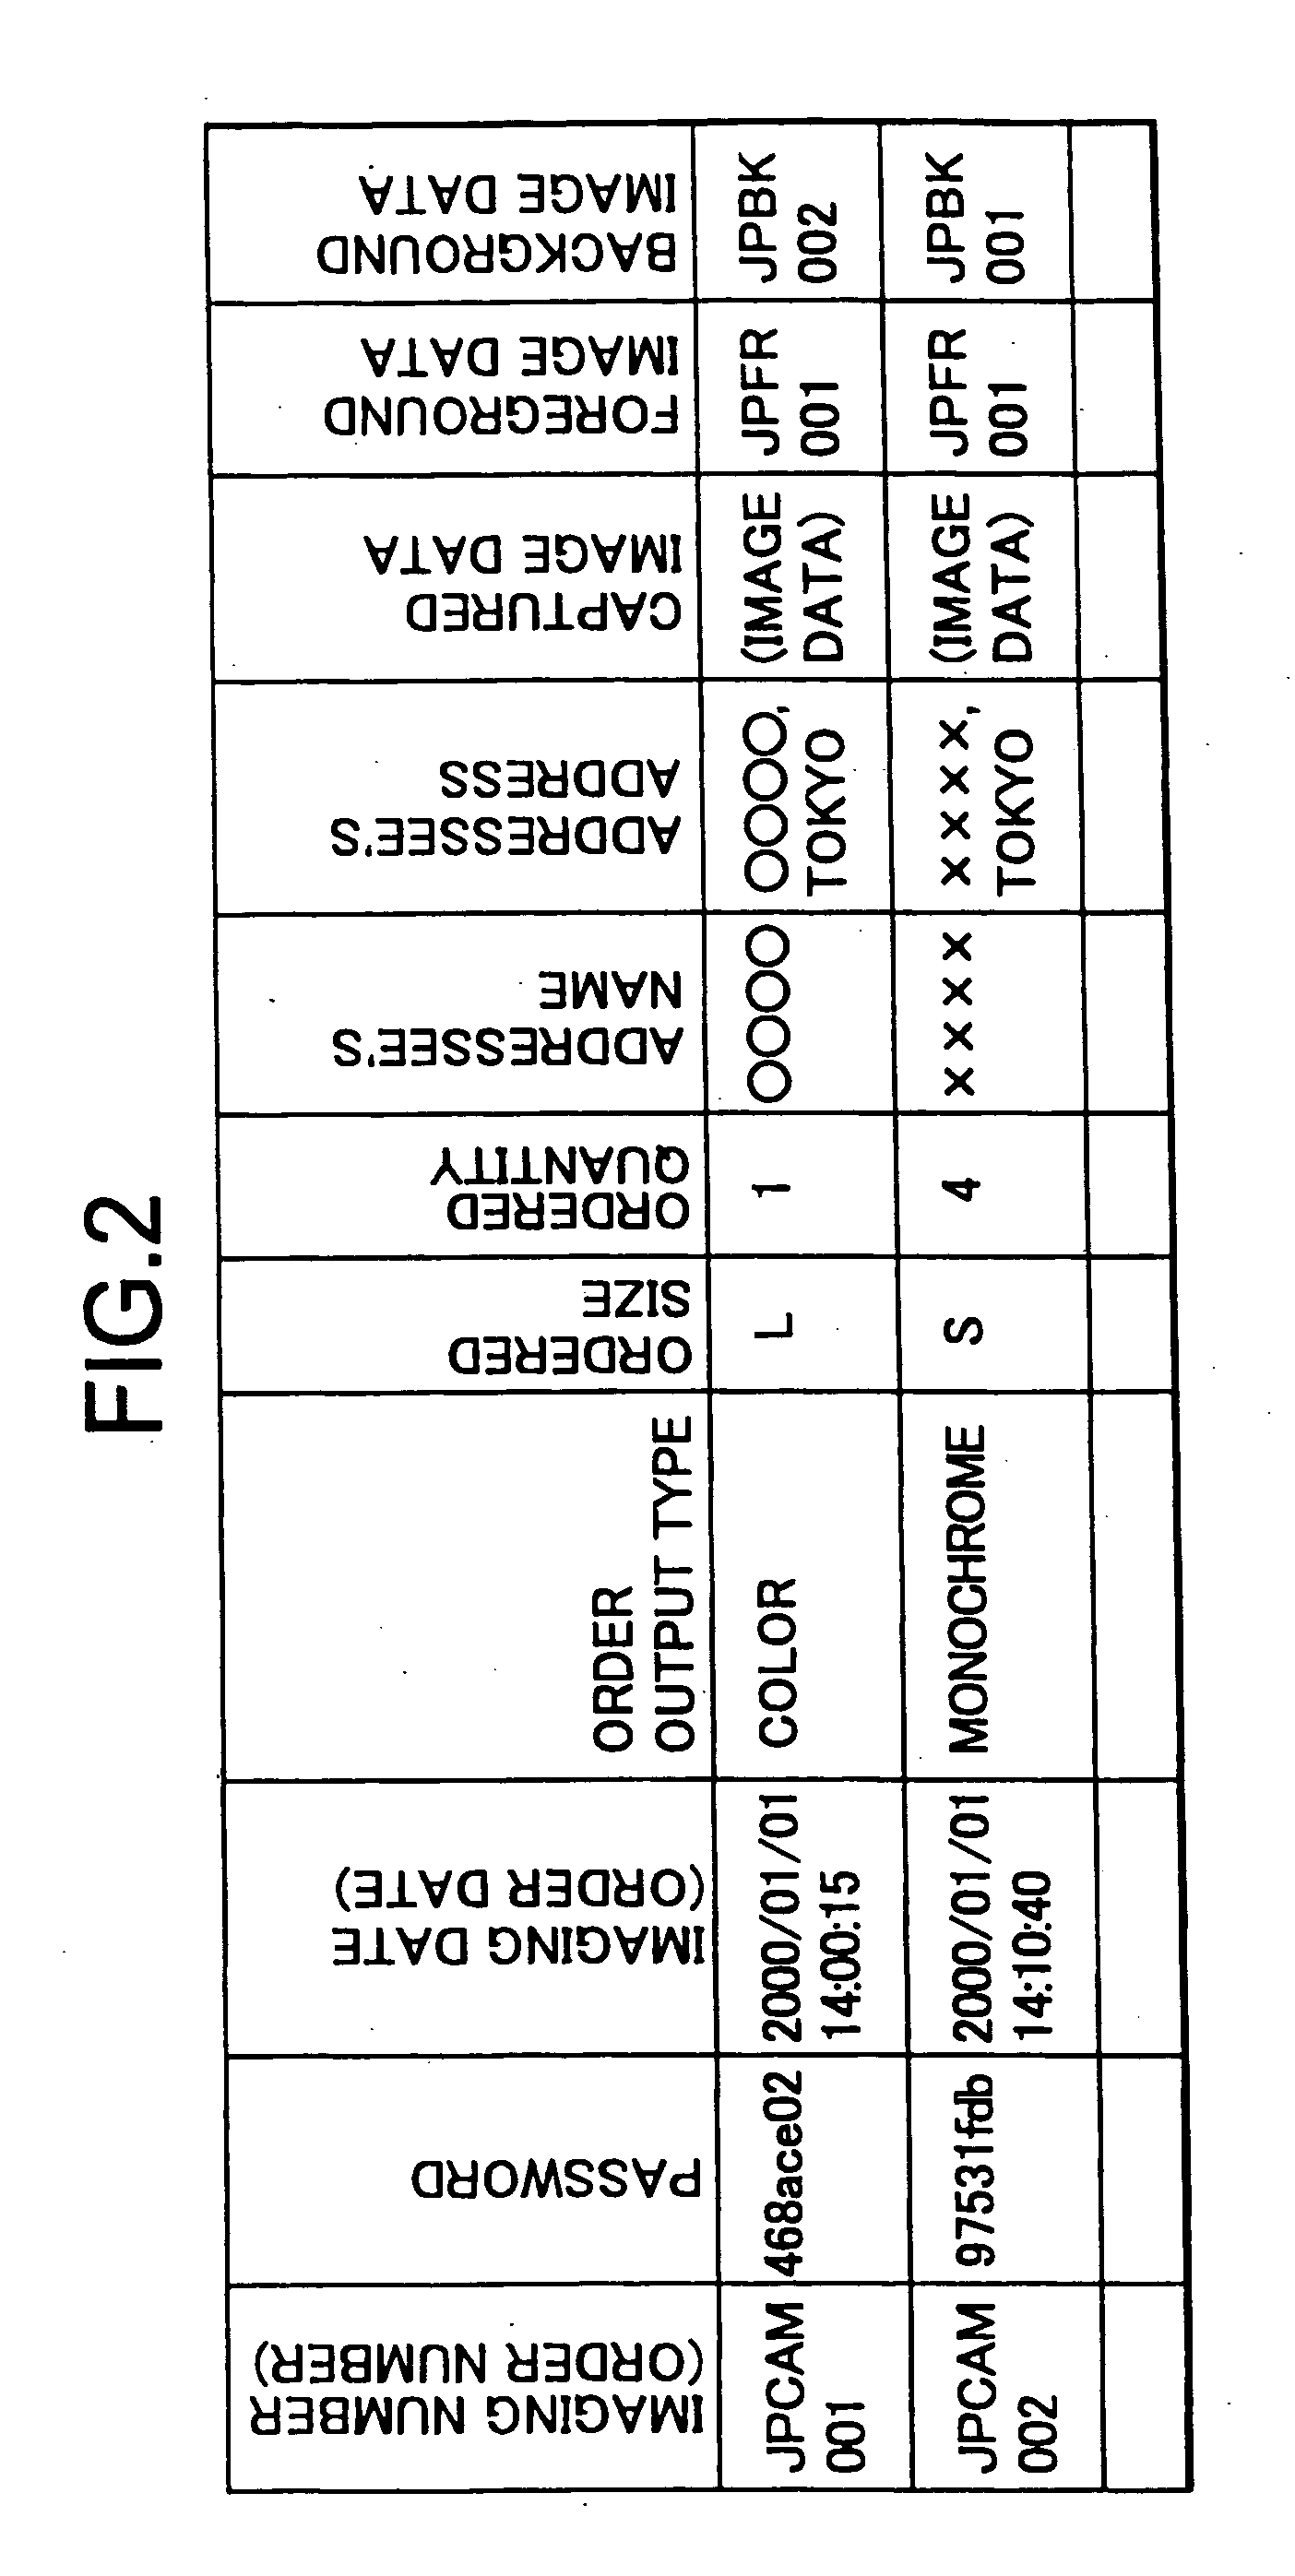 Image printing order receiving sysem and image printing order receiving method